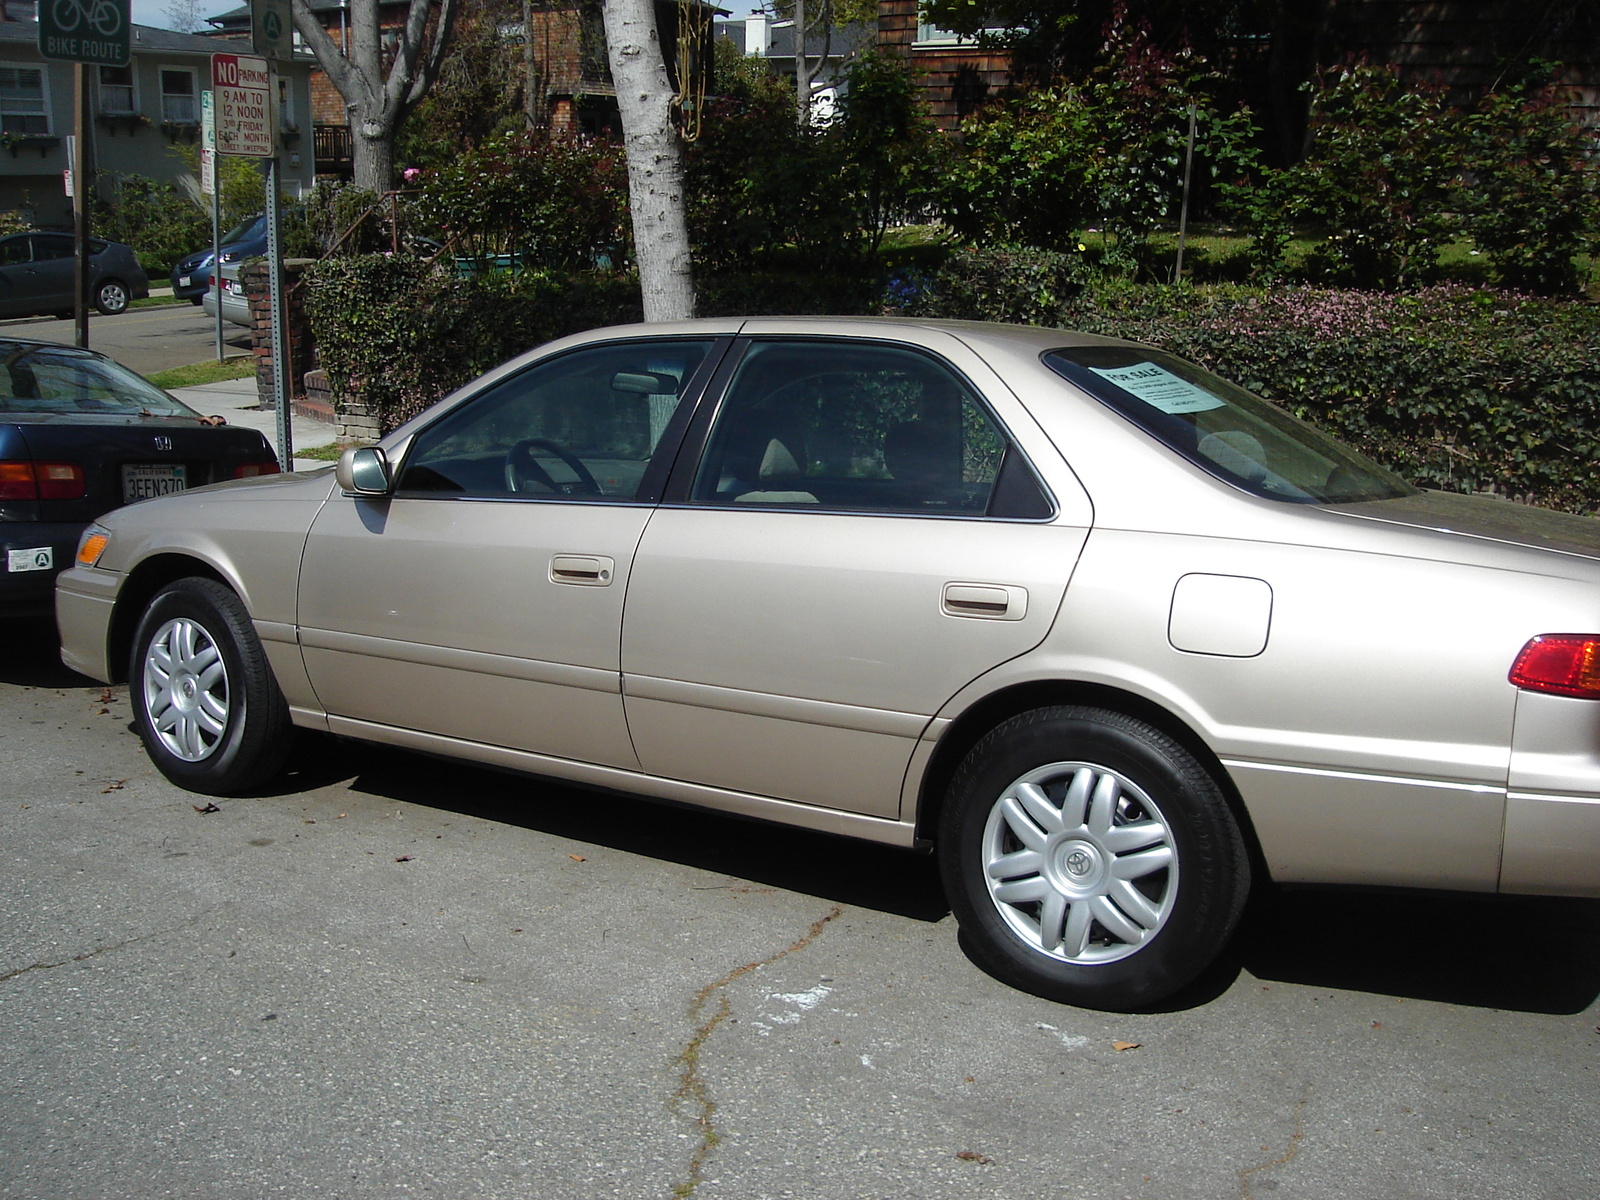 Used 2000 toyota camry le v6